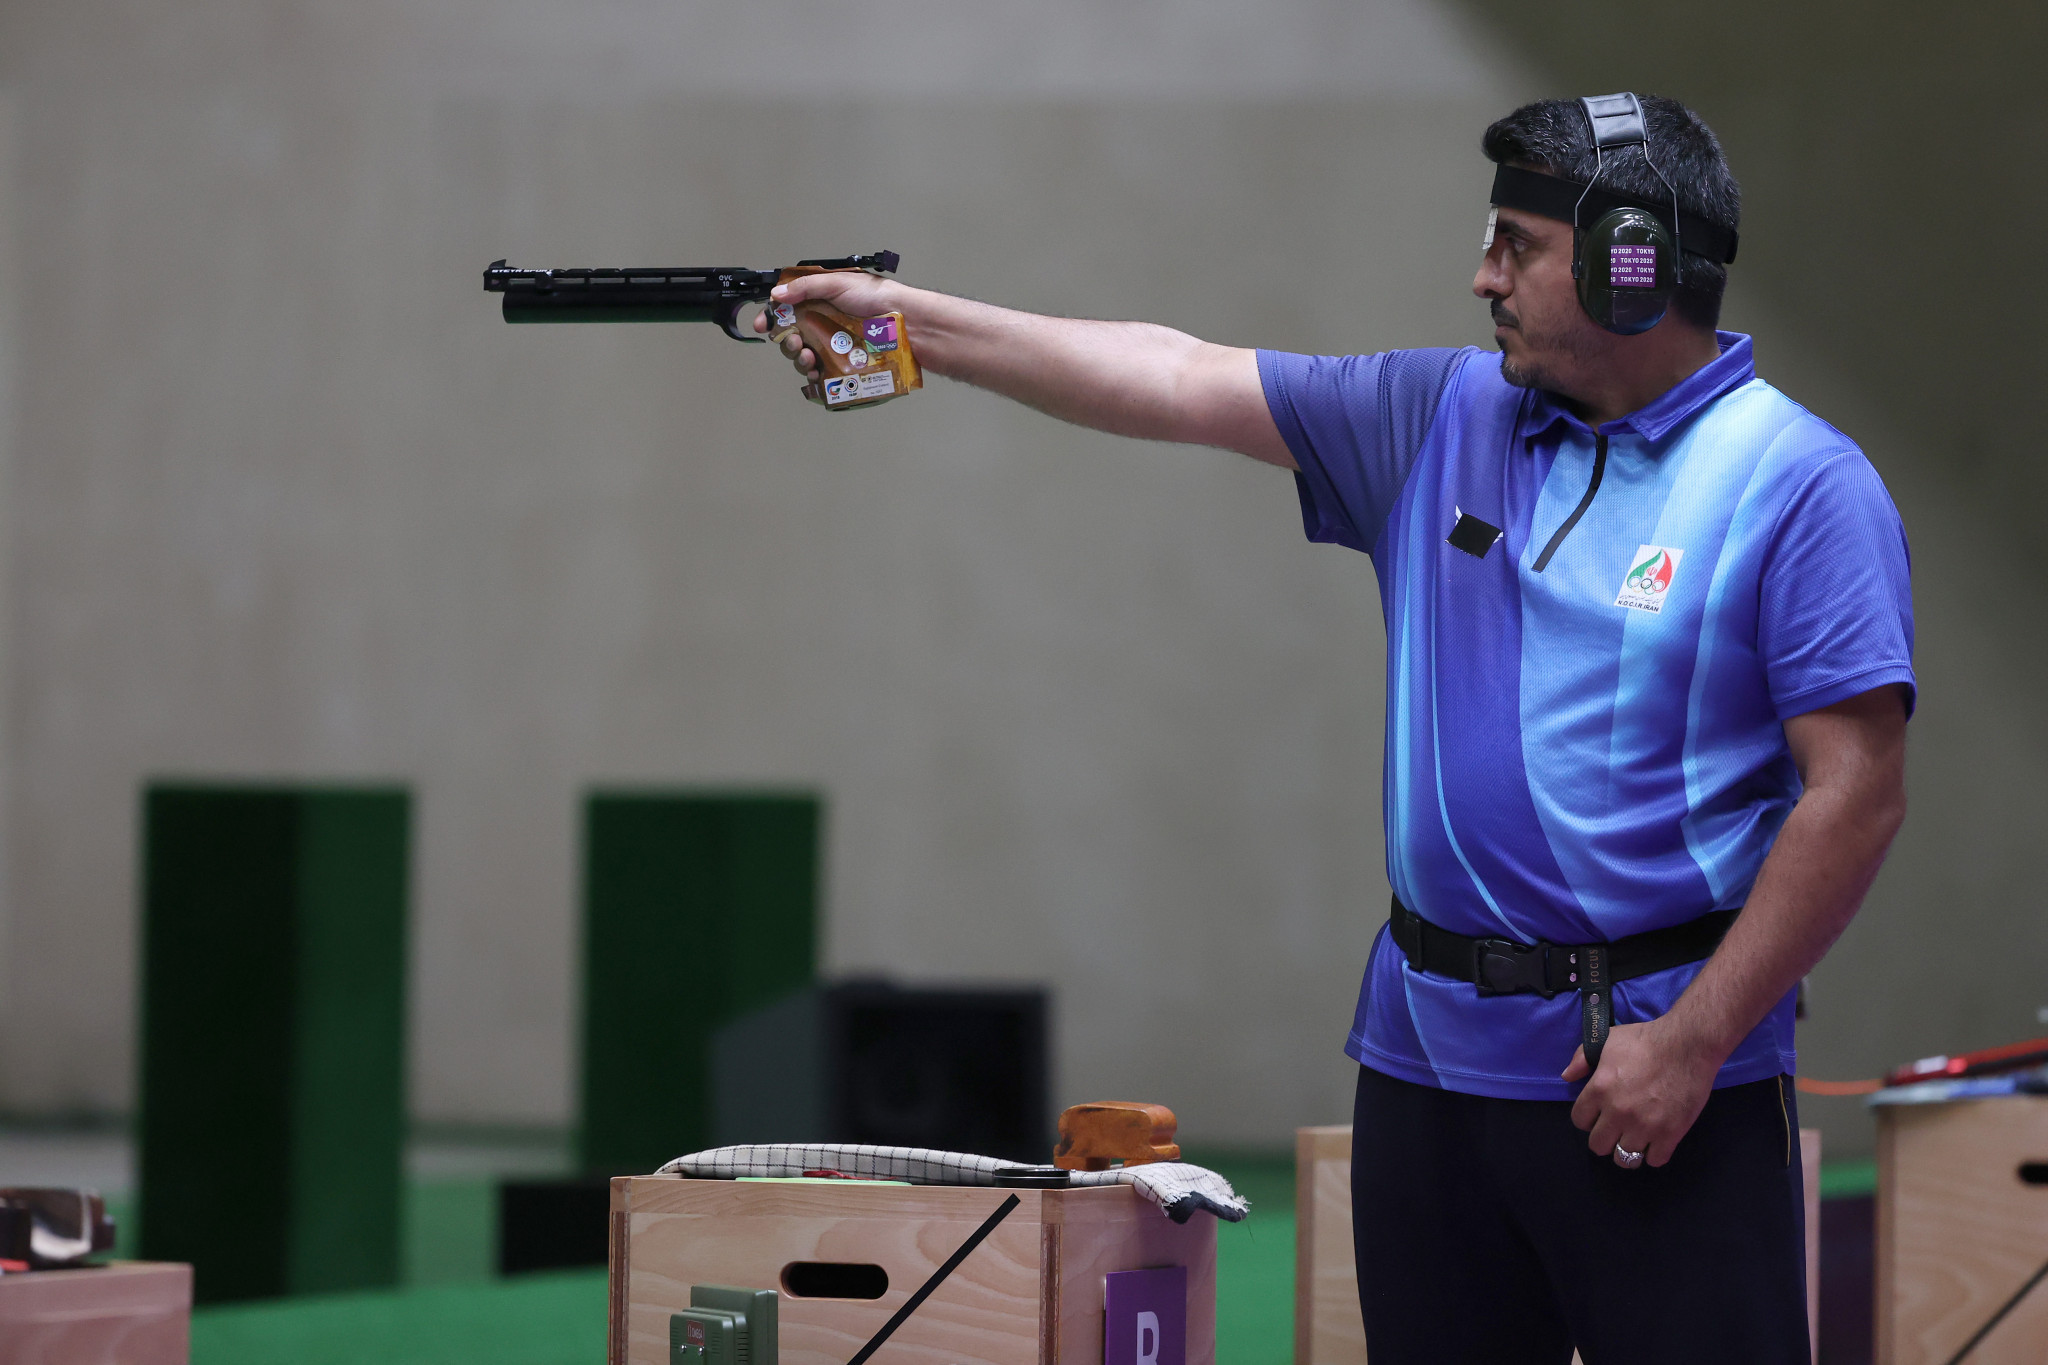 Javad Foroughi is set to compete in two competitions at the ISSF Grand Prix in Cairo ©Getty Images